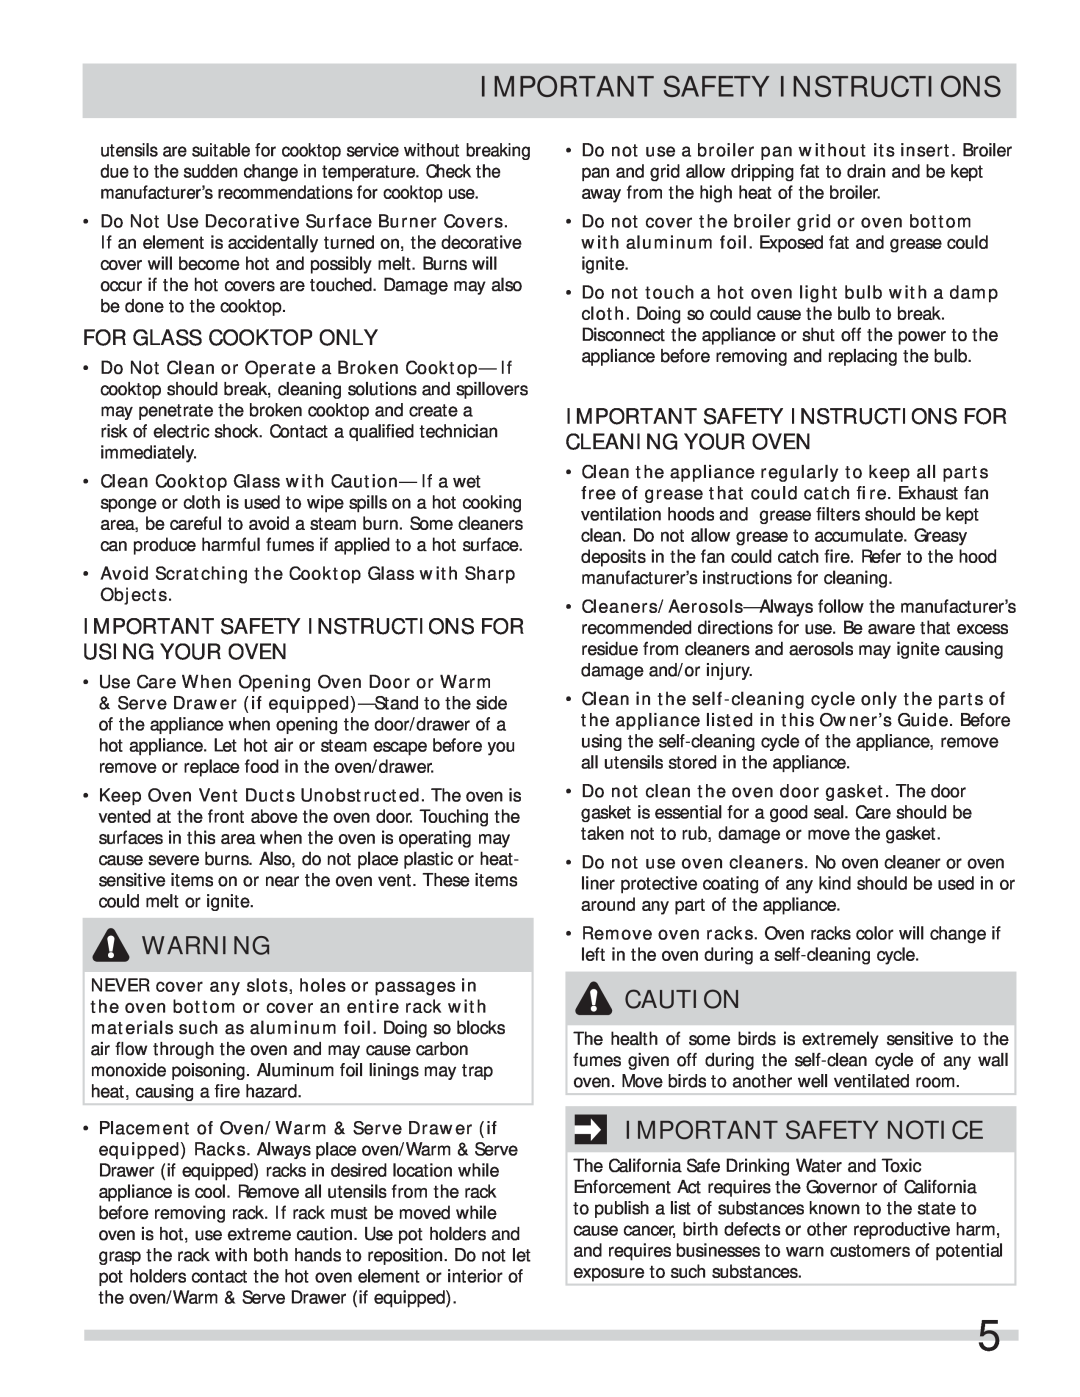 Frigidaire FFES3027LS Important Safety Notice, For Glass Cooktop Only, Important Safety Instructions For Using Your Oven 